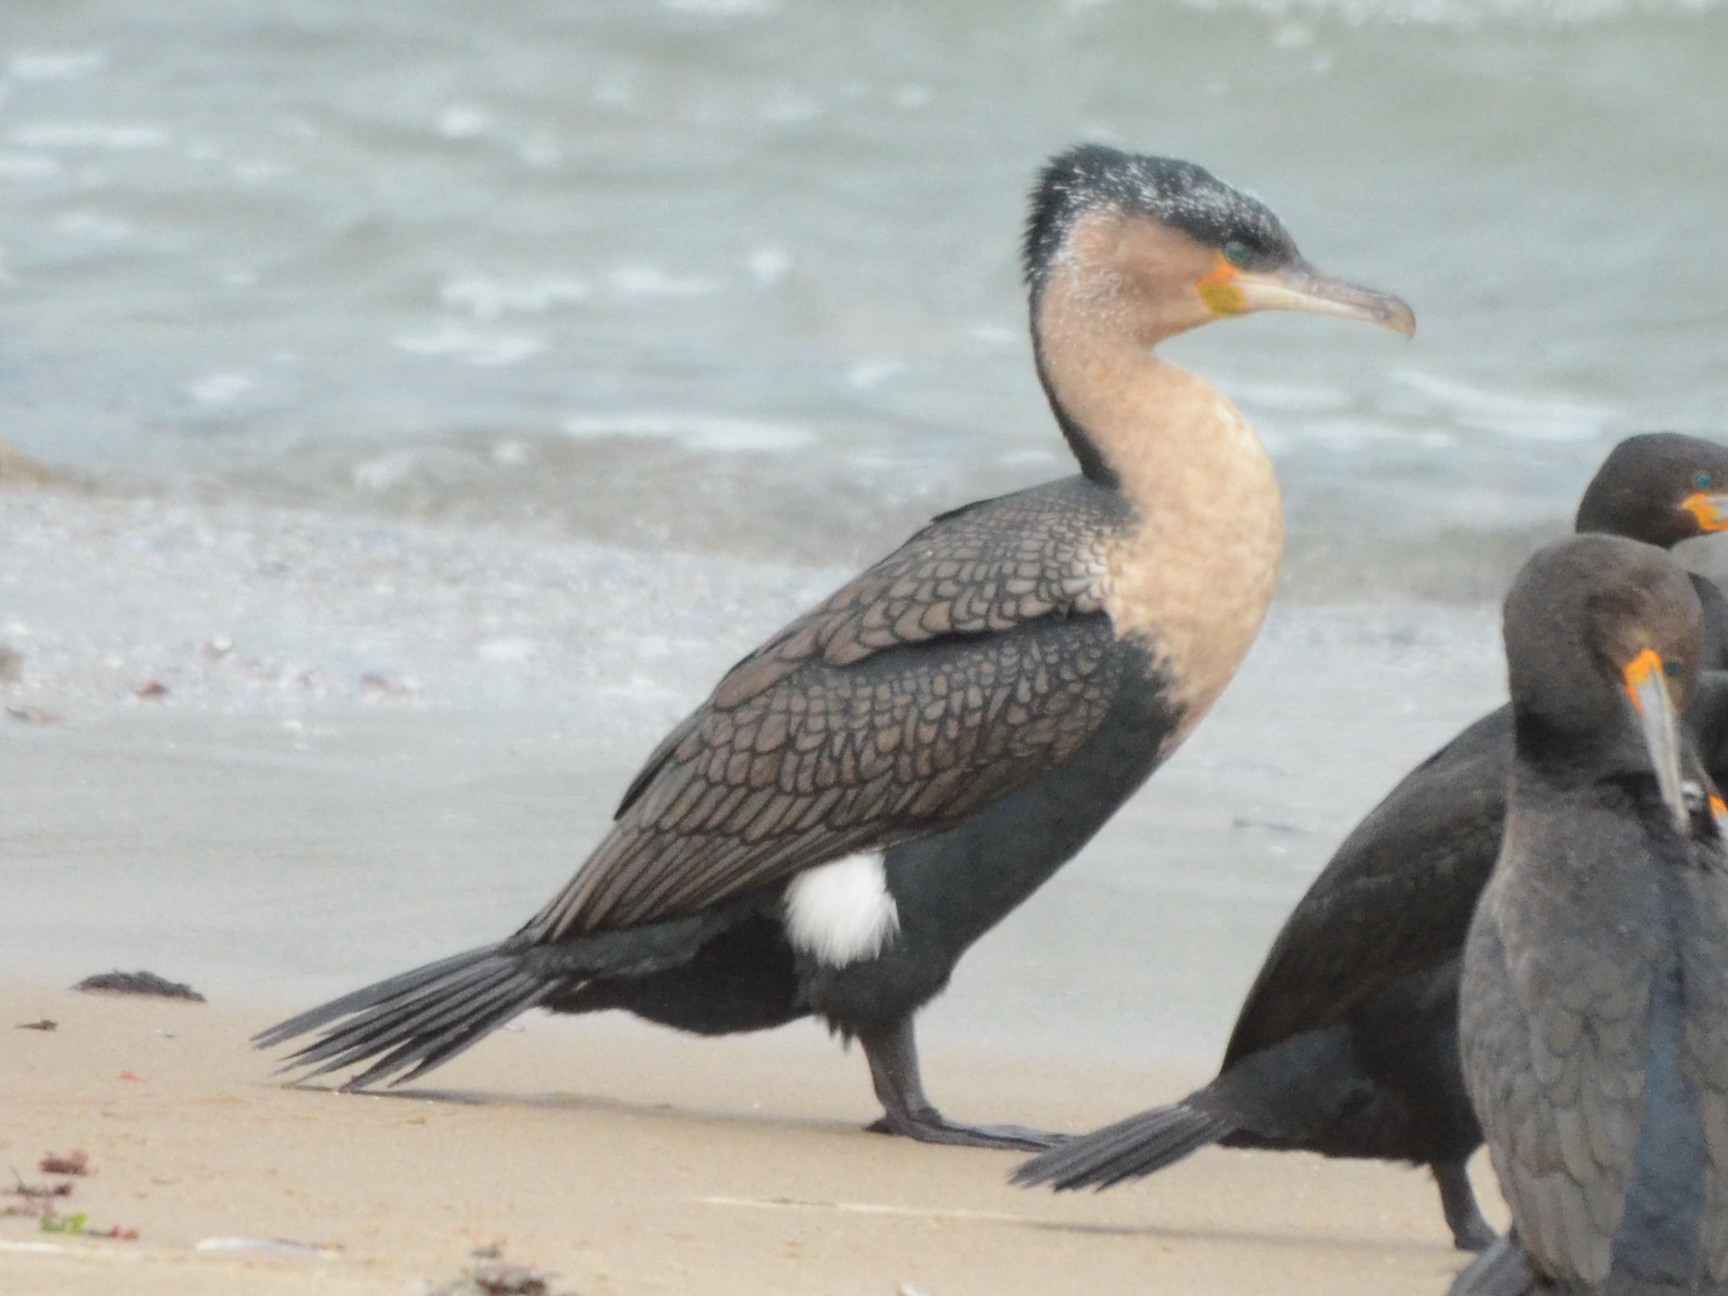 Click picture to see more White-breasted Cormorants.